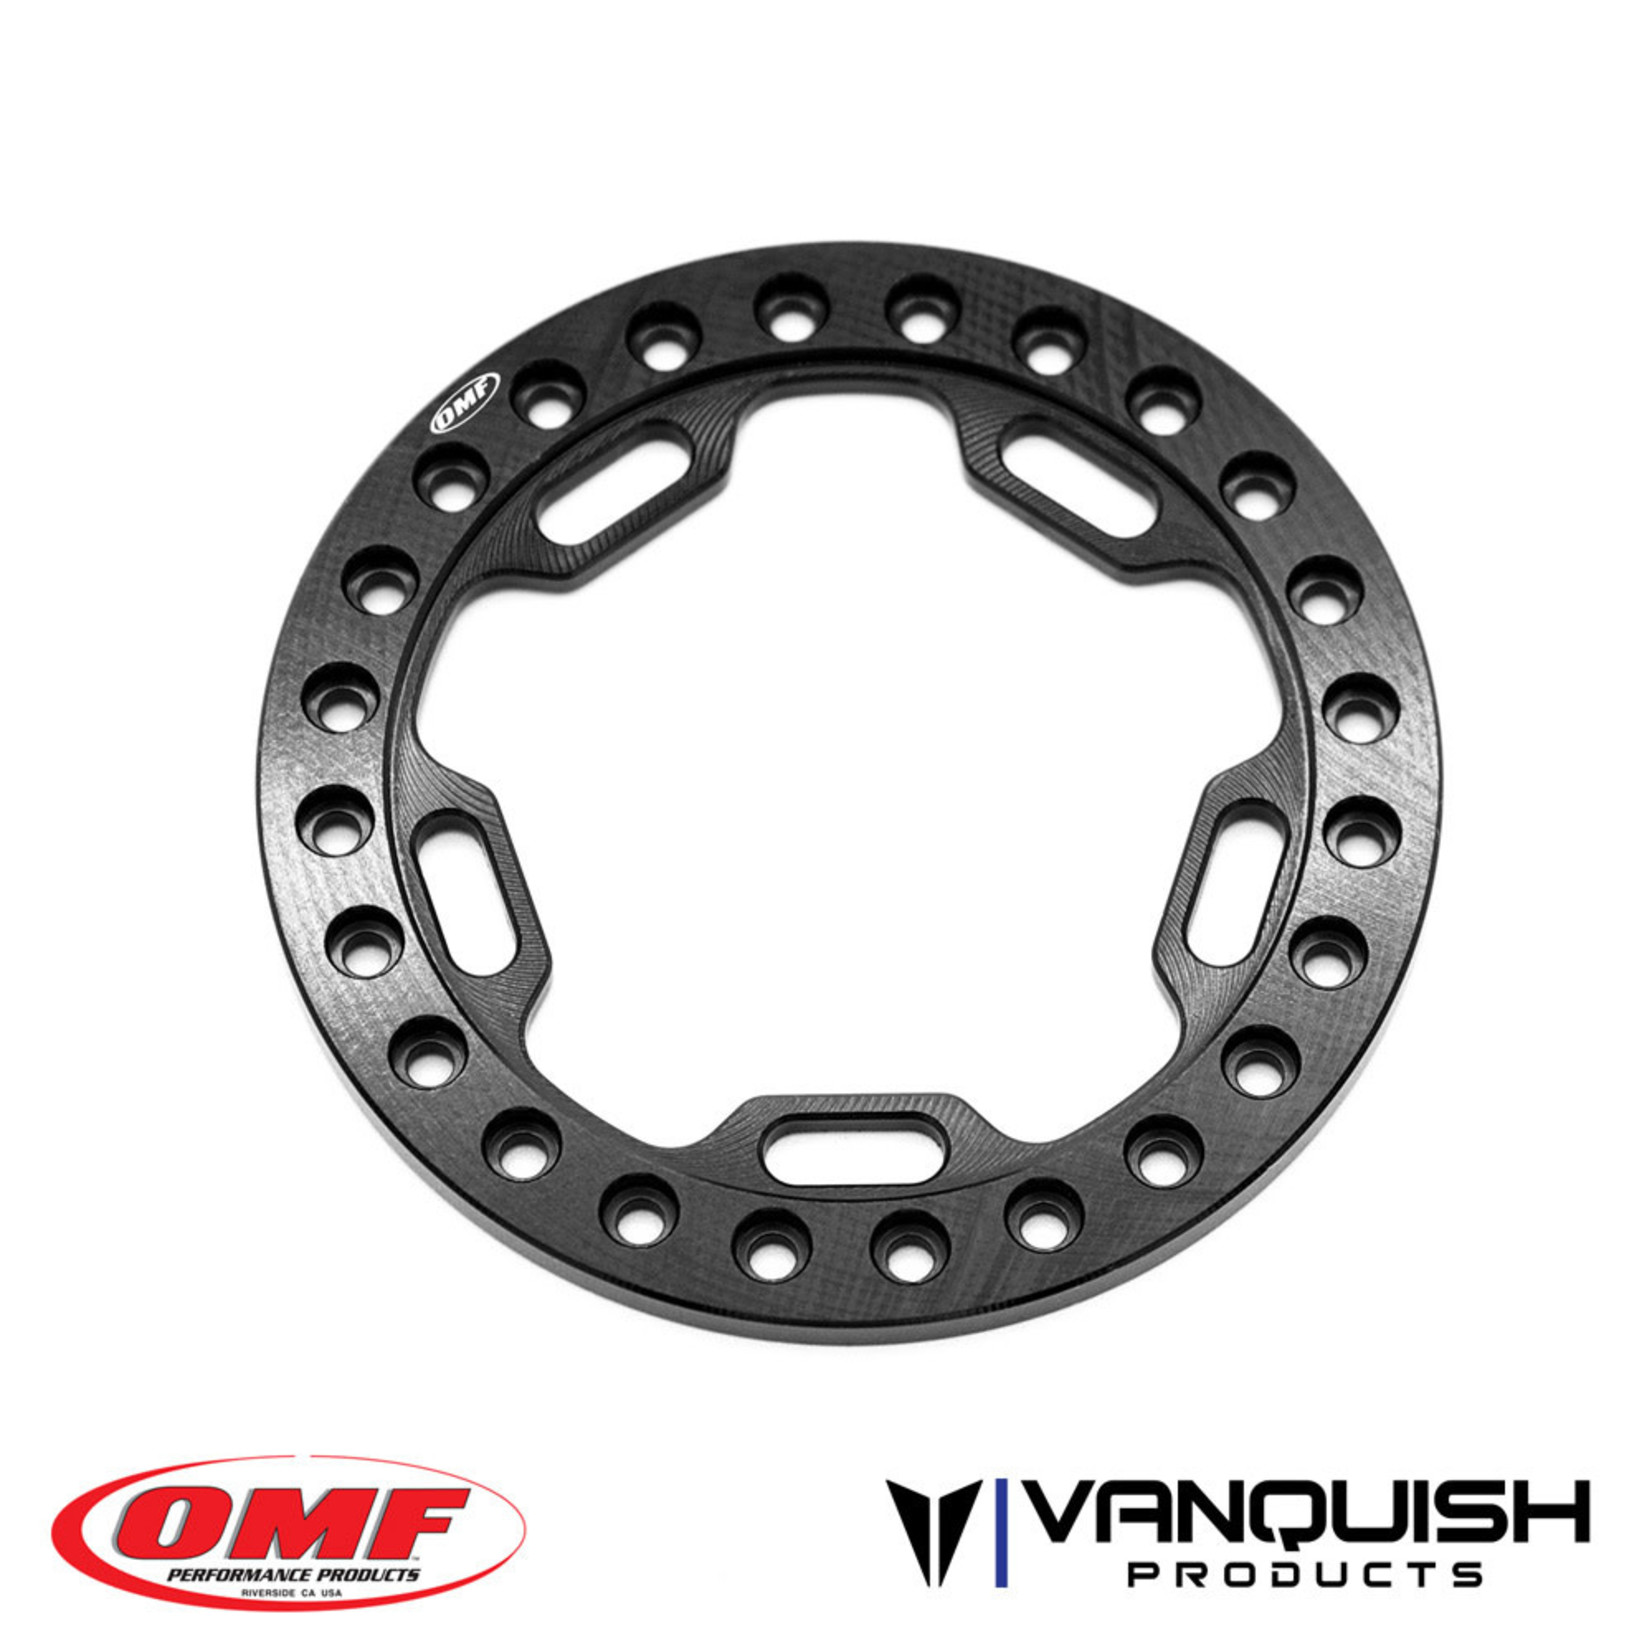 Vanquish Products Vanquish Products OMF 1.9" Phase 5 Beadlock Ring (Black) #VPS05112